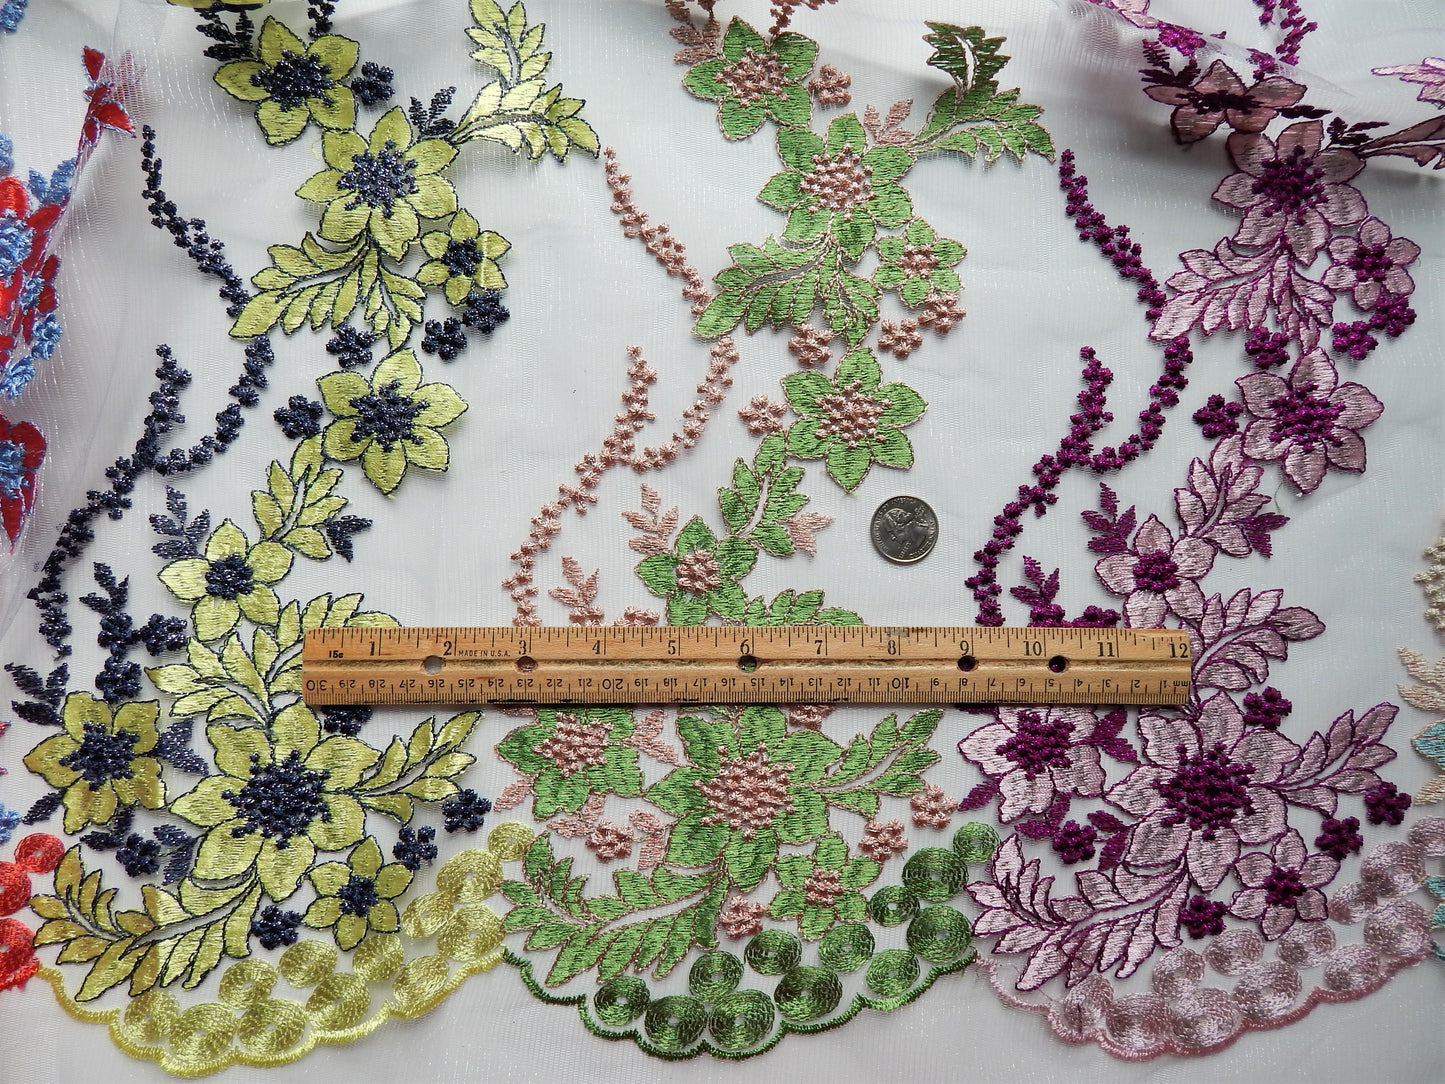 Yellow, green, and purple lace fabric